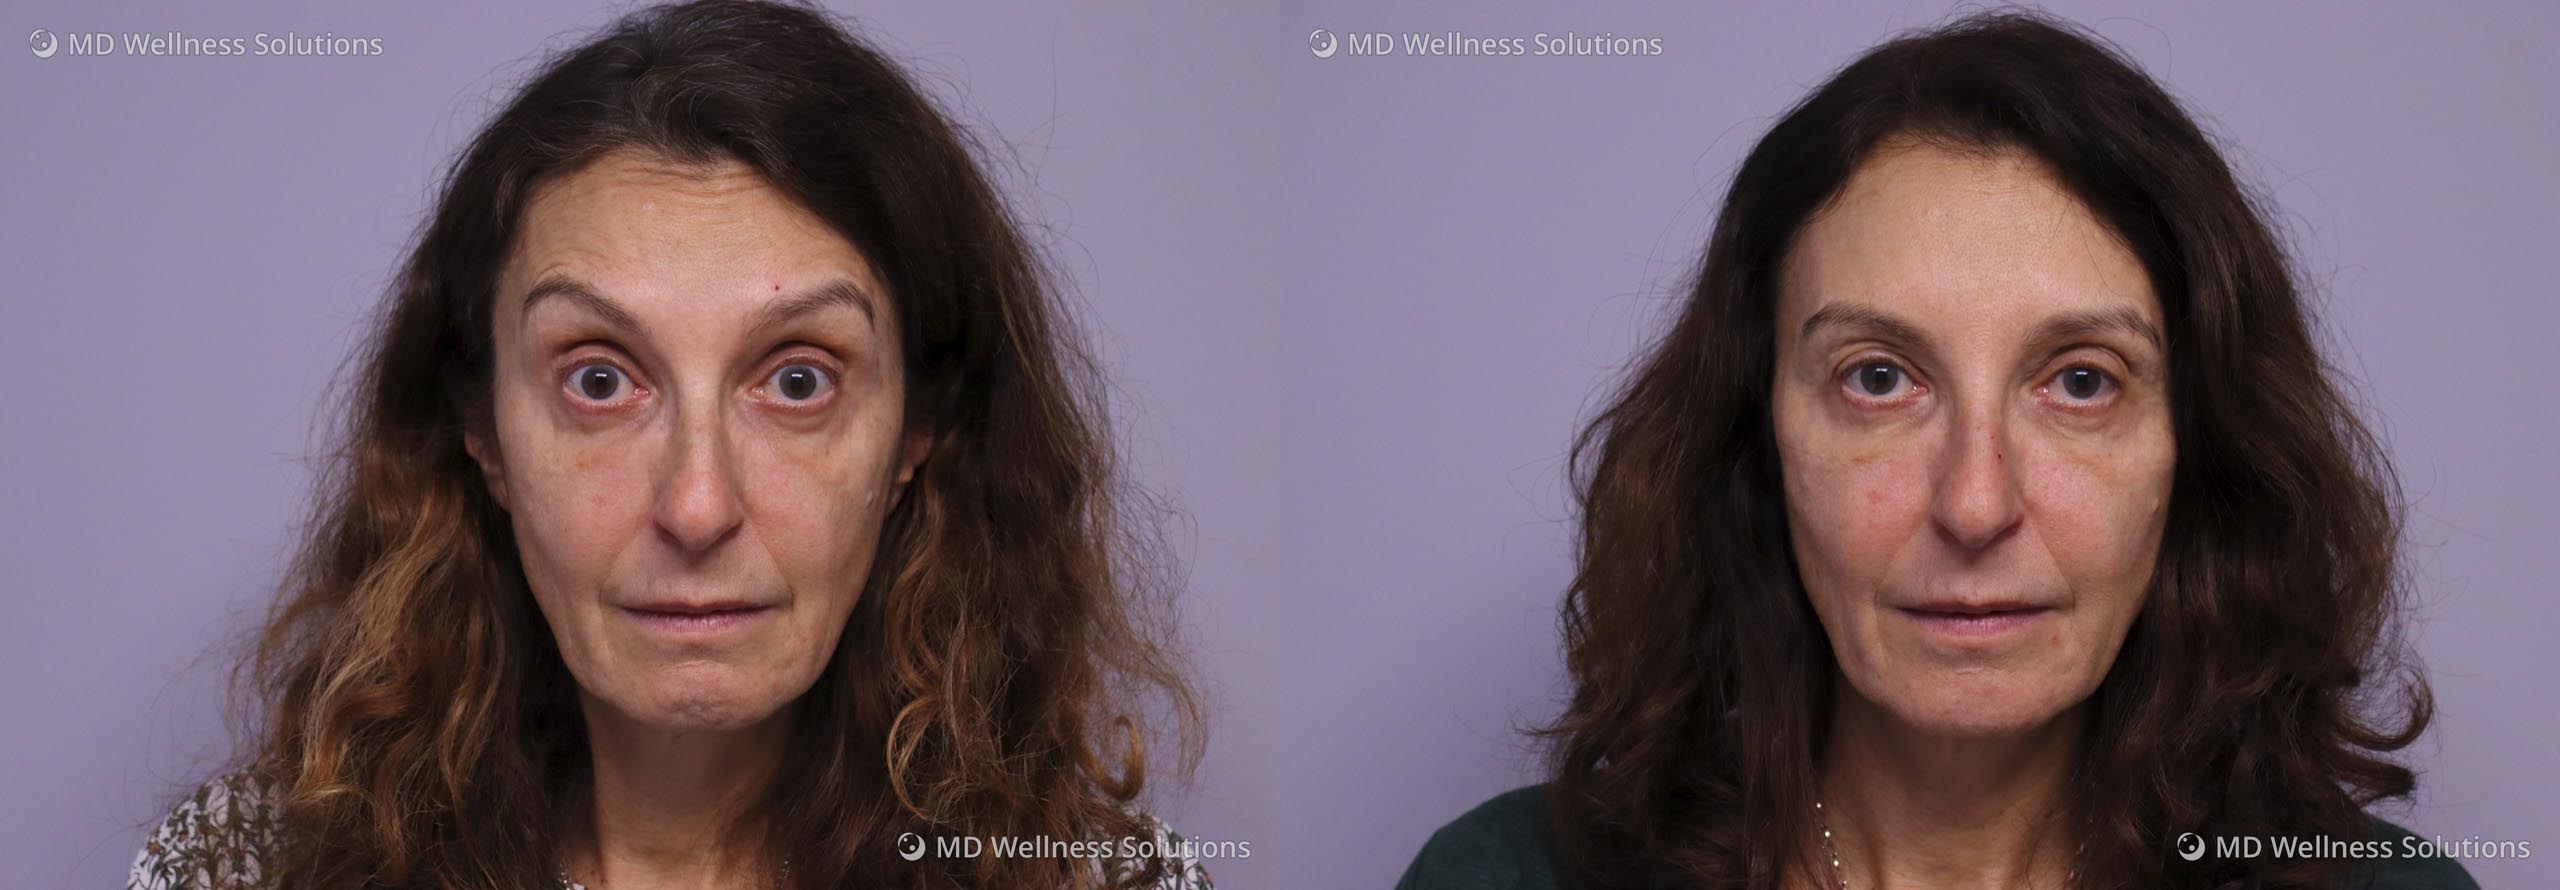 55-64 year old woman before and after neurotoxin treatment